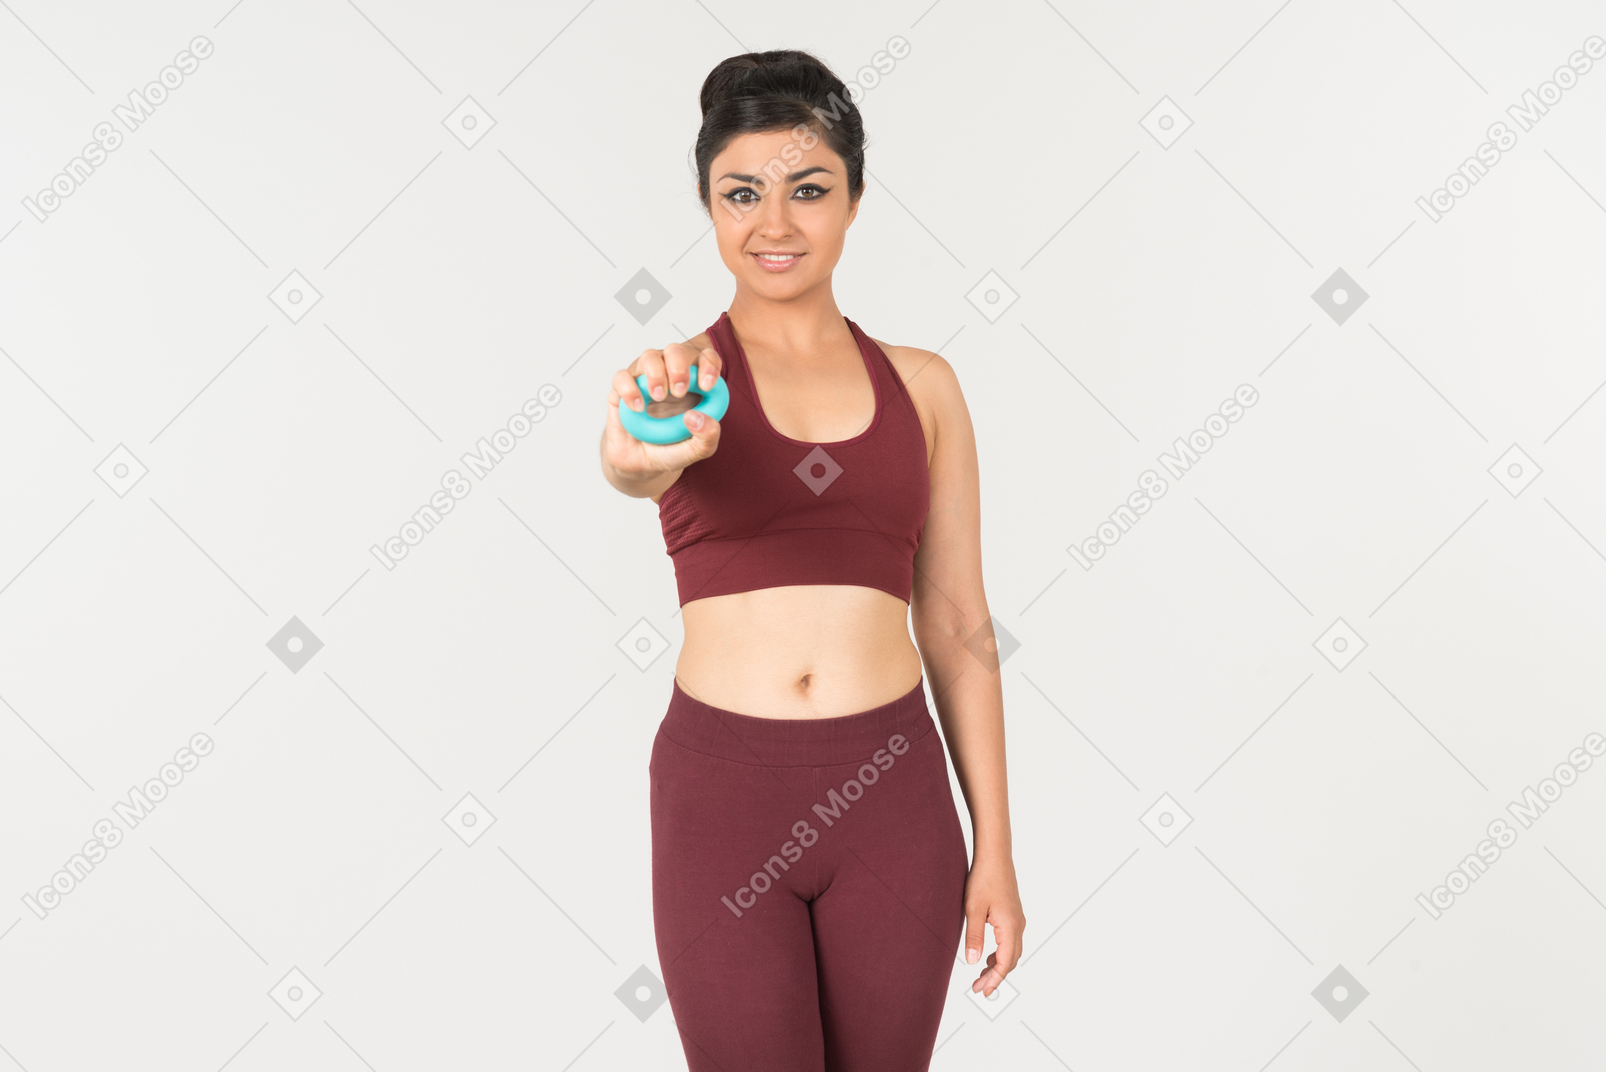 Young indian woman in sporstwear holding cloth ruler folded in her wrist